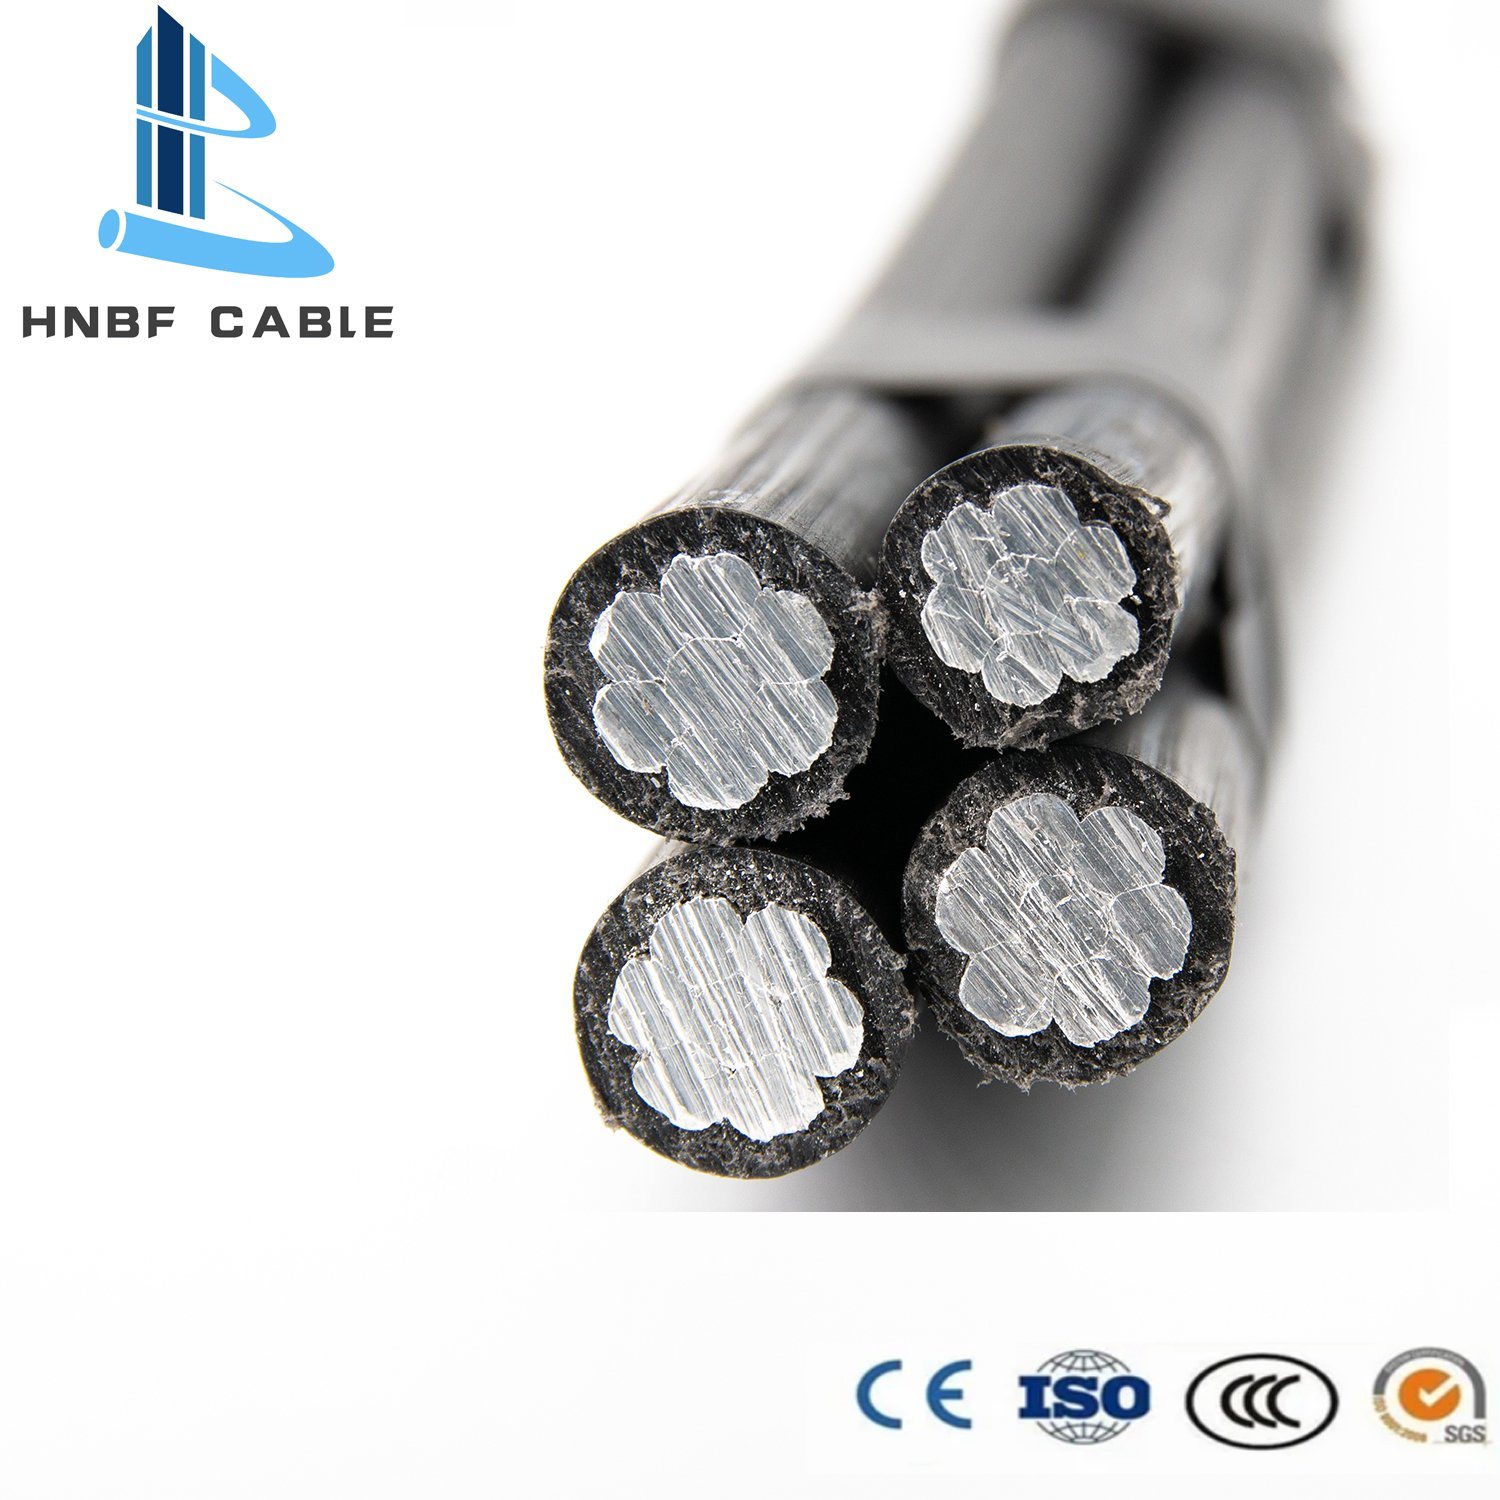 LV ACSR/AAAC Conductor XLPE Covered Aerial Bundled ABC Cable 350 Kcmil for Overhead Transmission Line